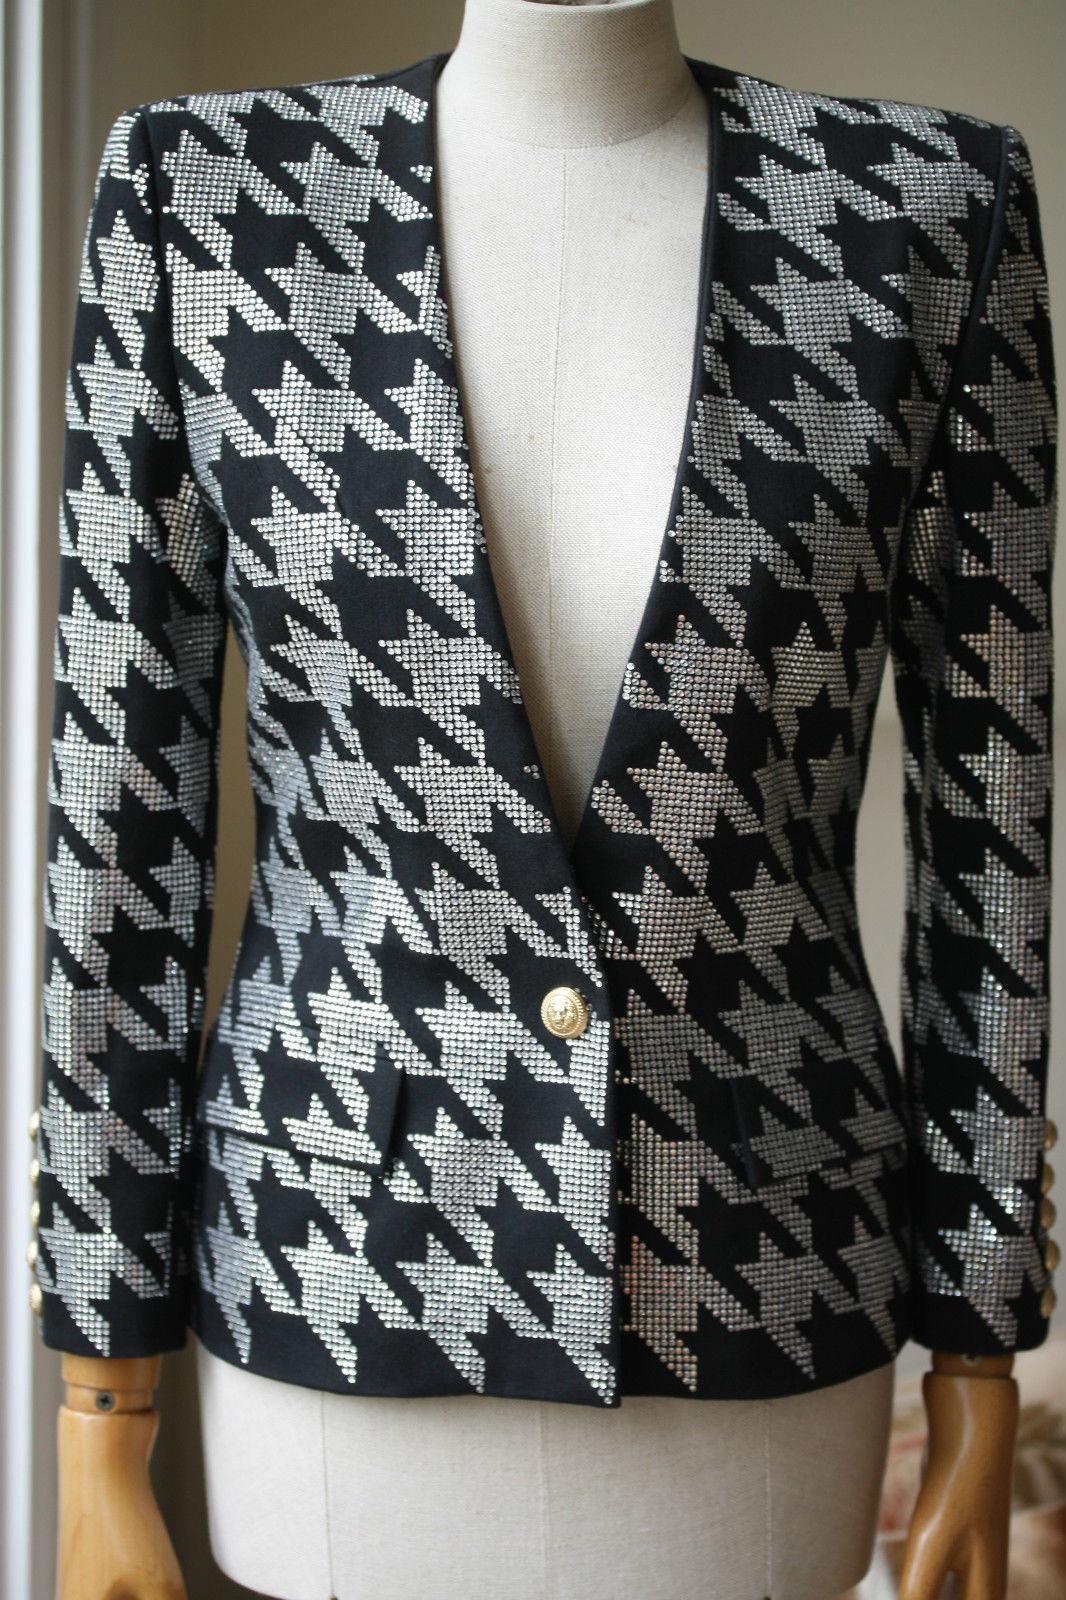 Black cotton blend embellished houndstooth jacket from Balmain featuring a v-neck, a gold-tone front button fastening, front flap pockets, three-quarter length sleeves and button cuffs.

Size: FR 38 (UK 10, US 6, IT 42)

Condition: No sign of wear. 